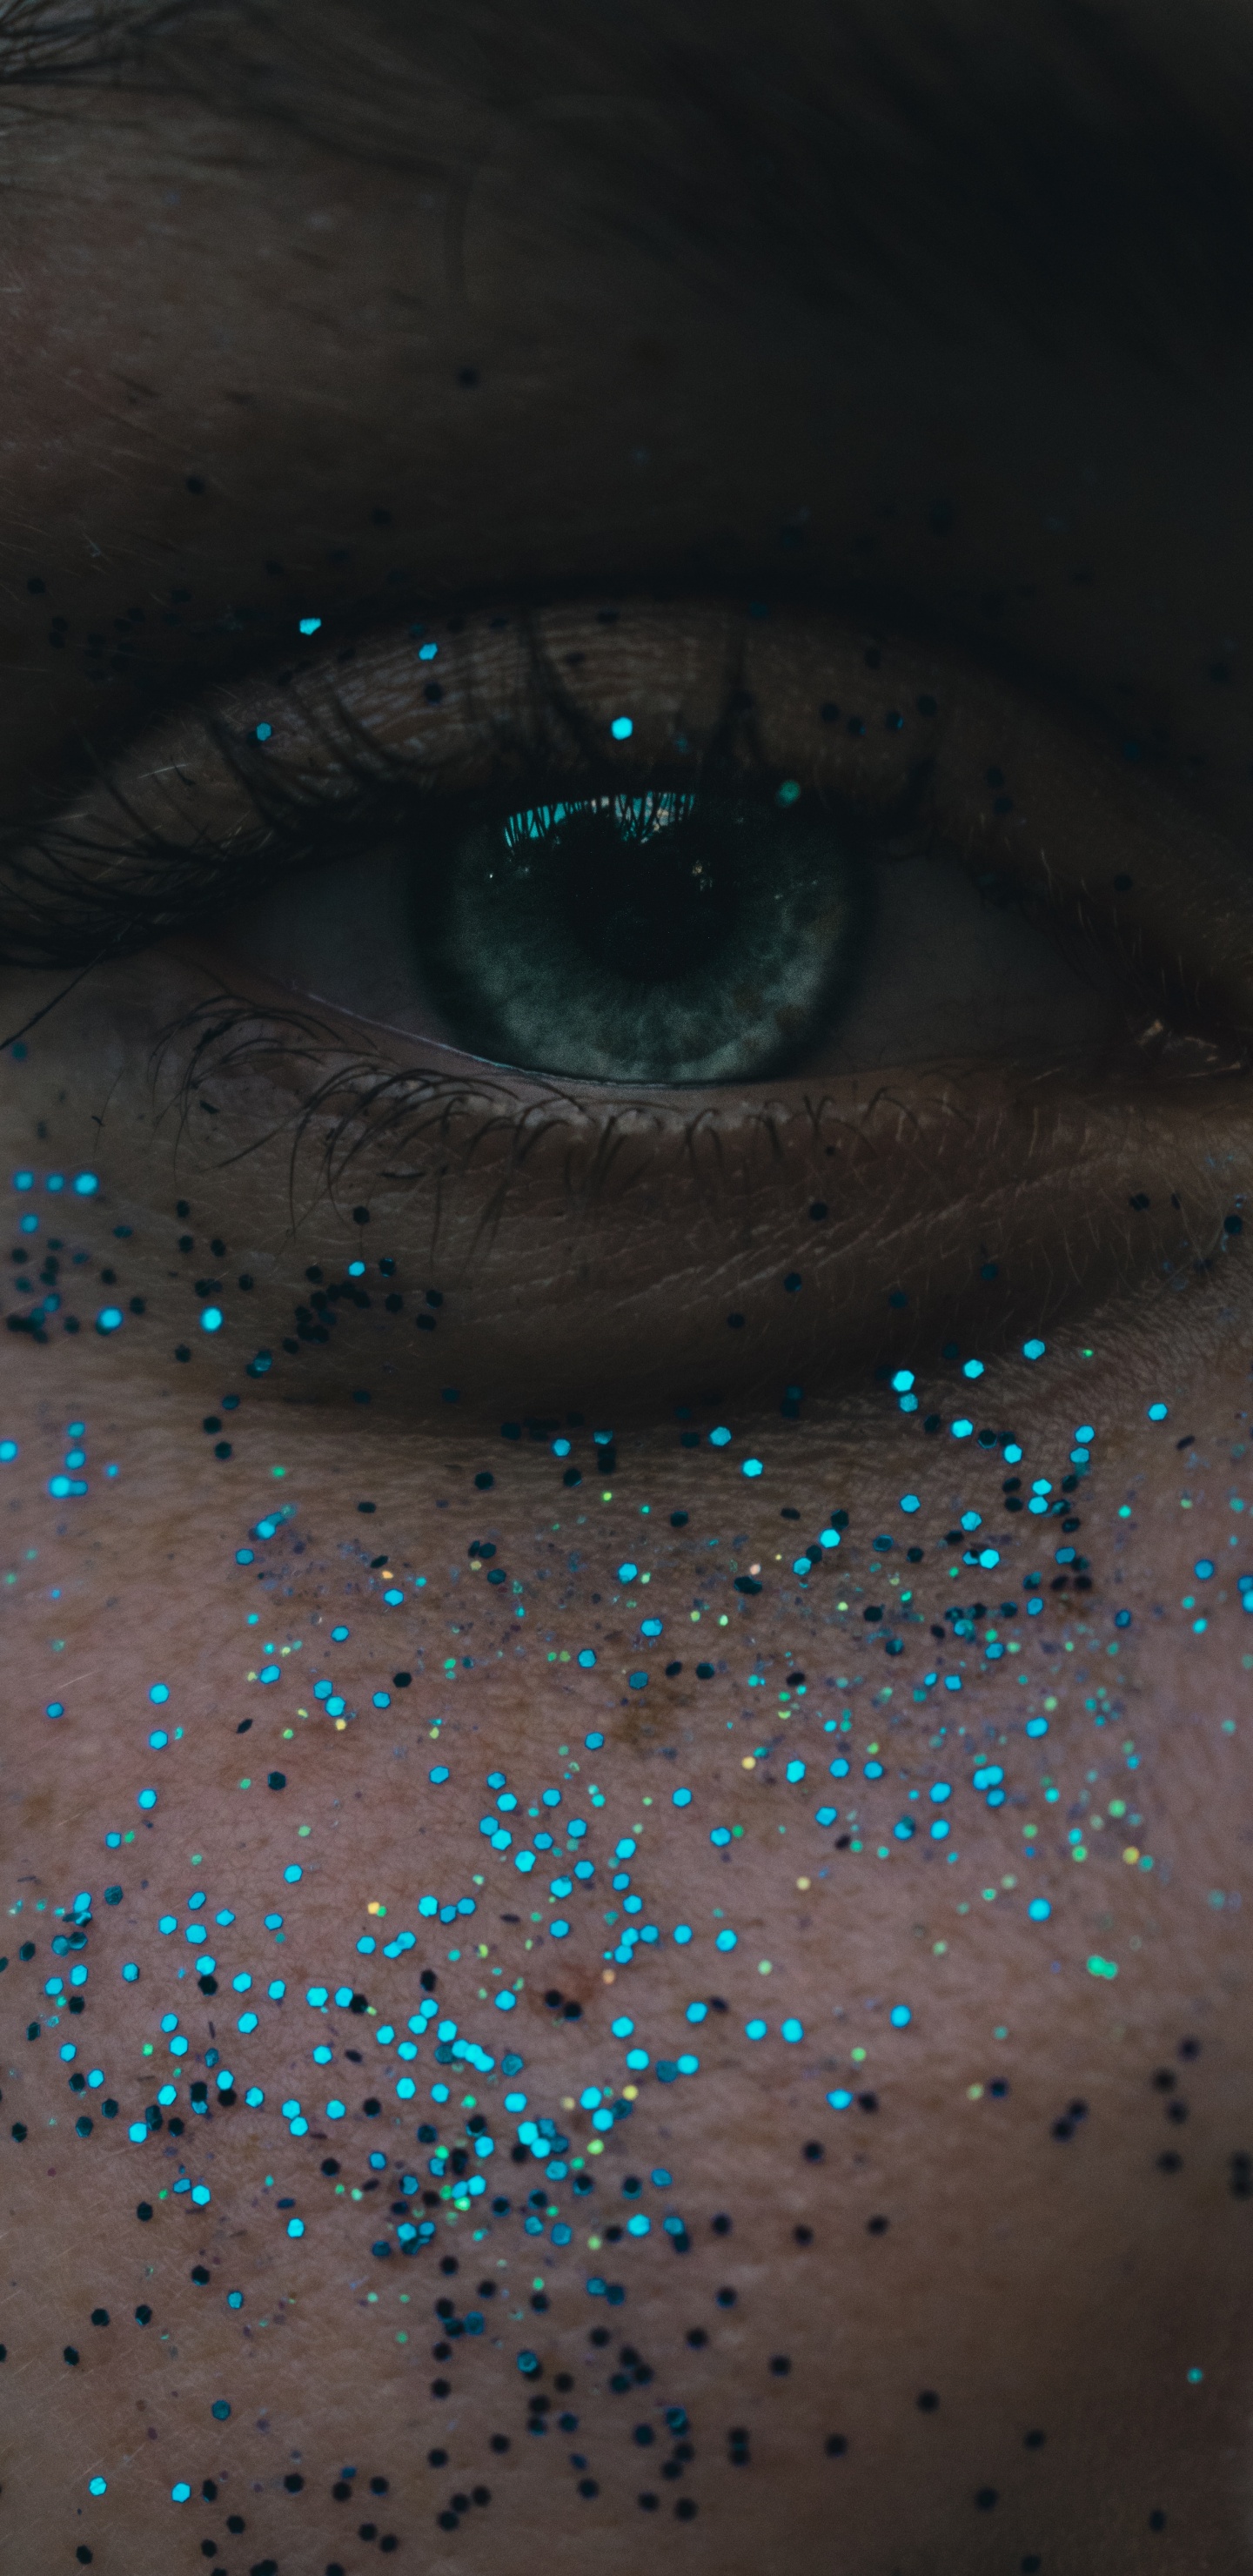 Persons Eye With Blue Eyes. Wallpaper in 1440x2960 Resolution